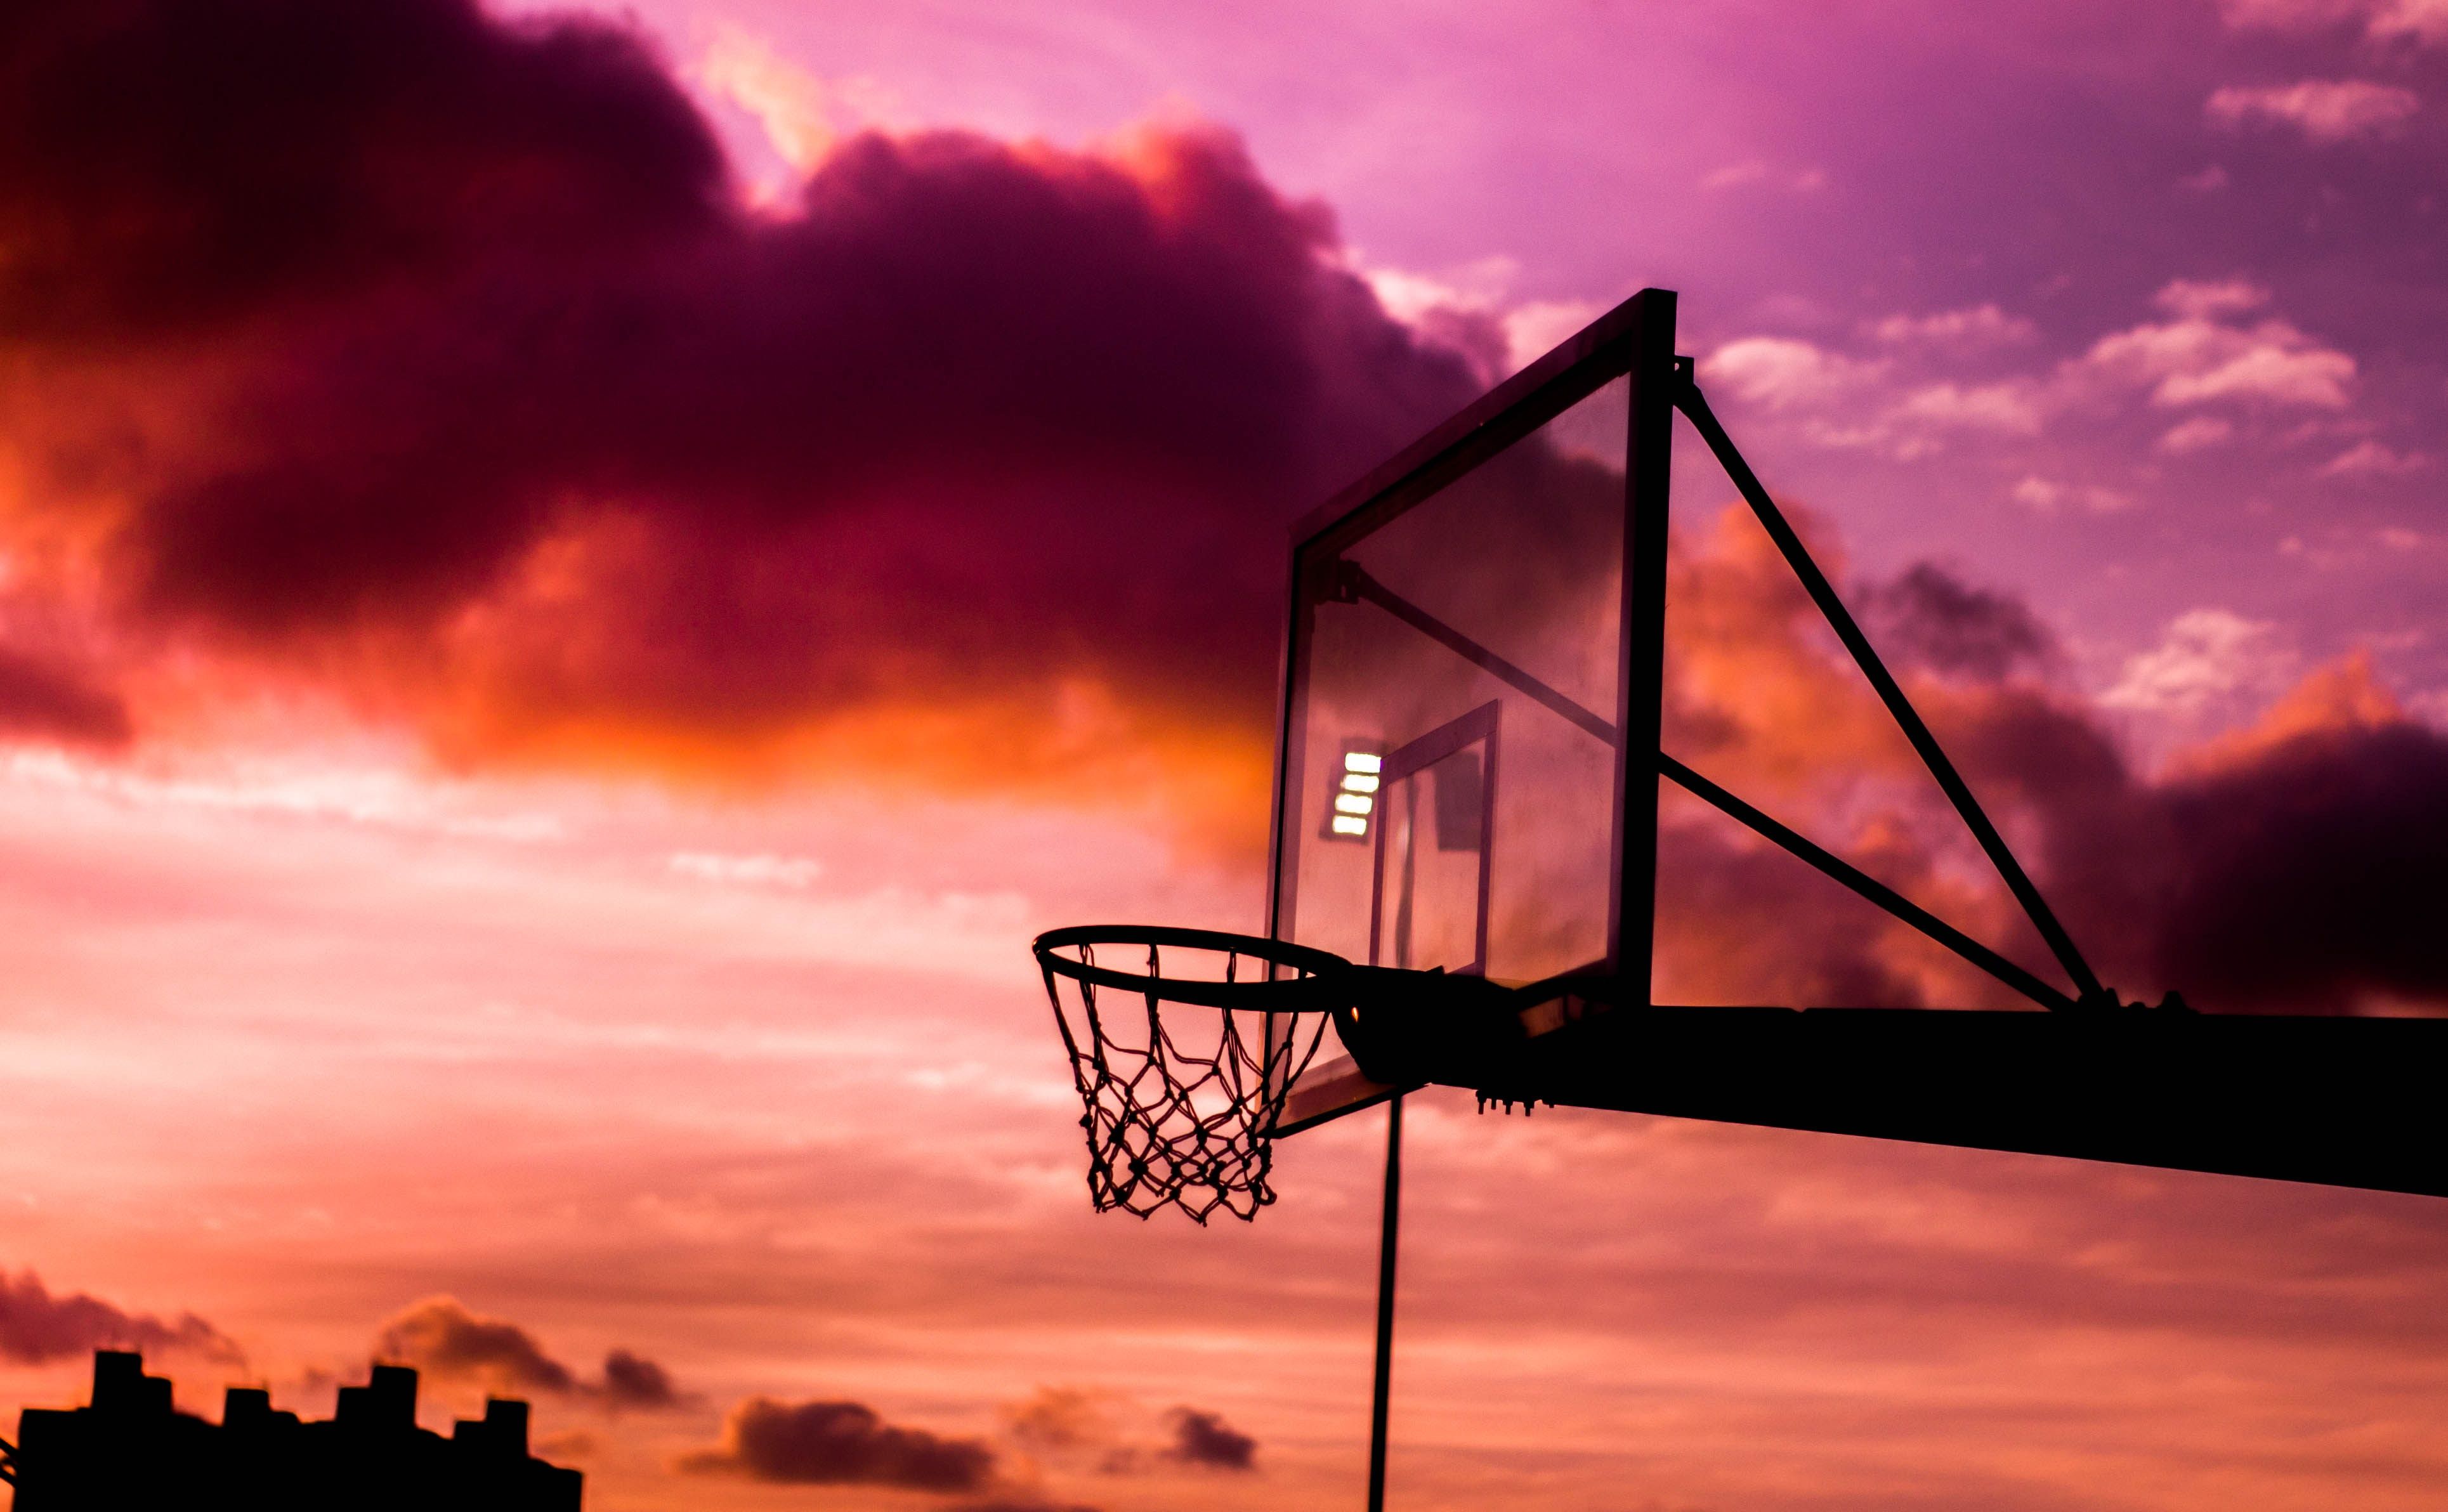 Silhouette Photo of Basketball Hoop During Golden Hour · Free